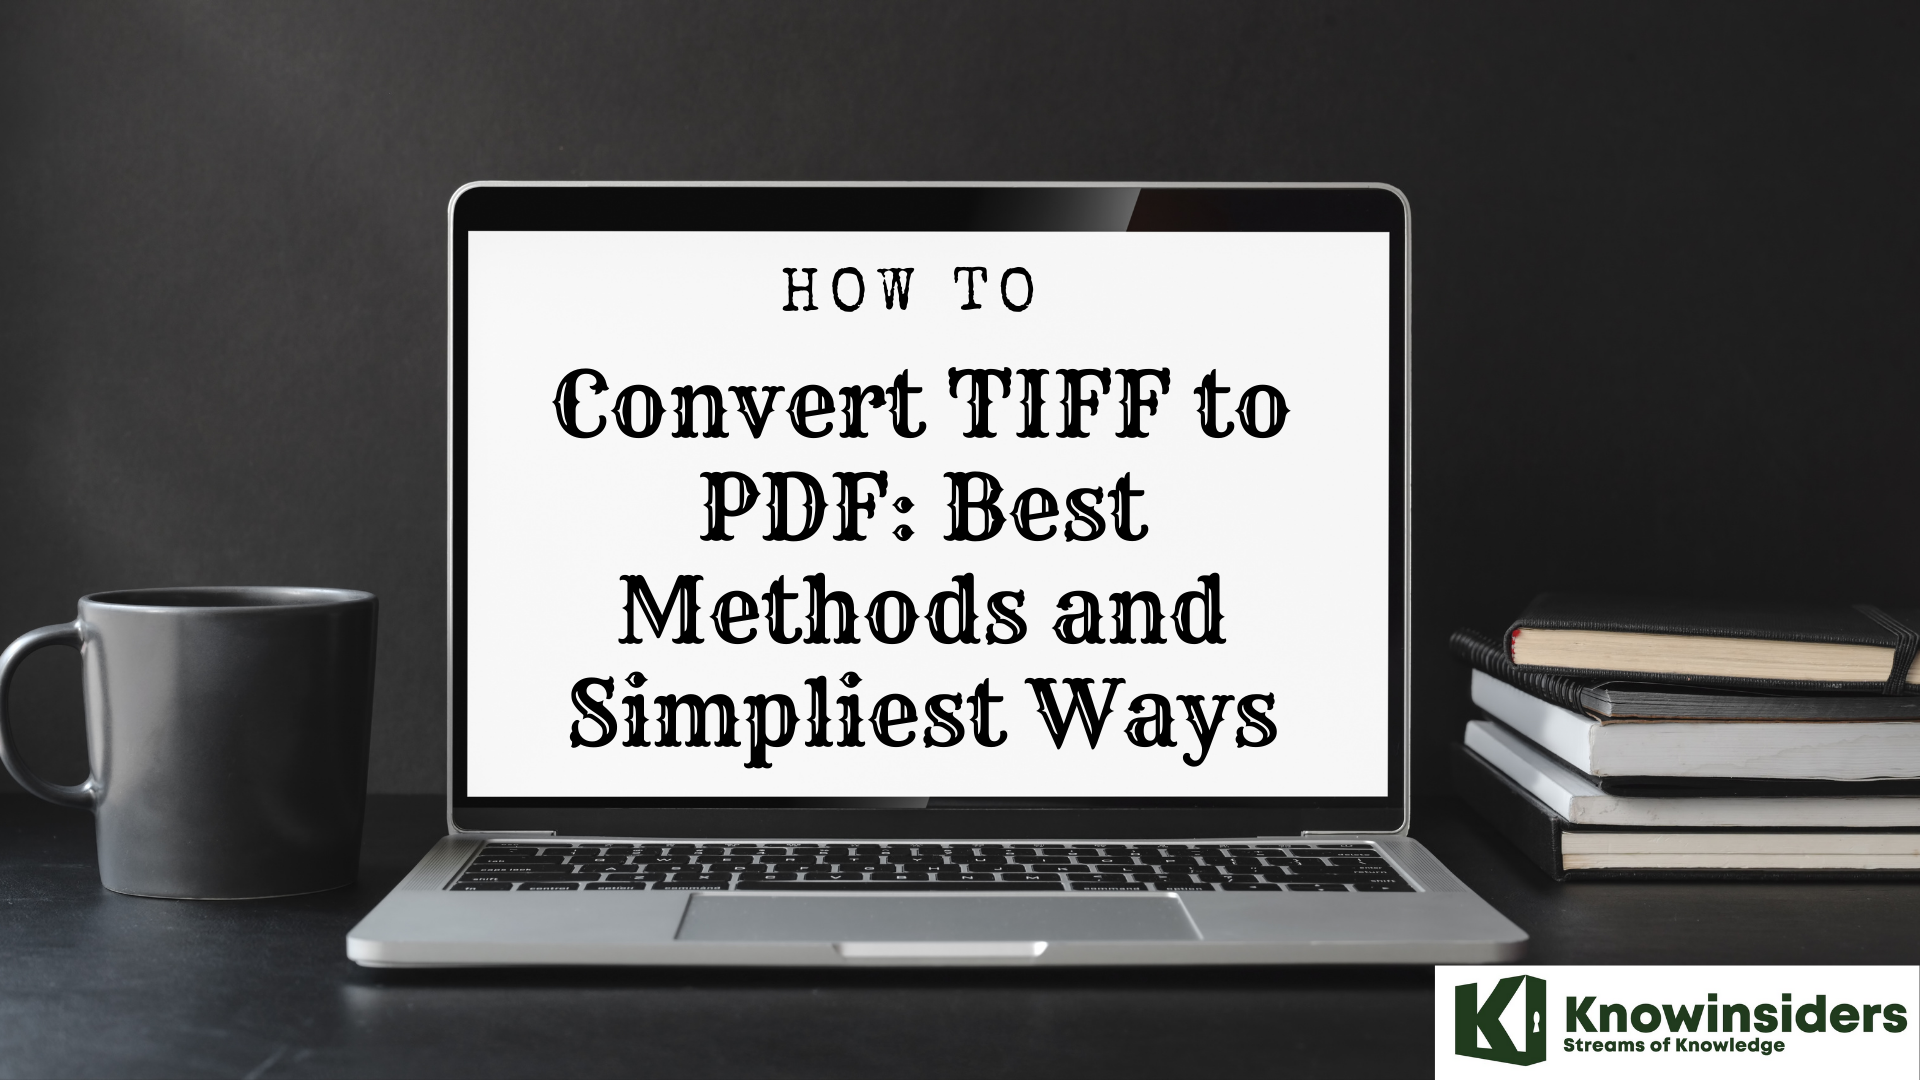 How to Convert TIFF to PDF: Simpliest Steps to Change